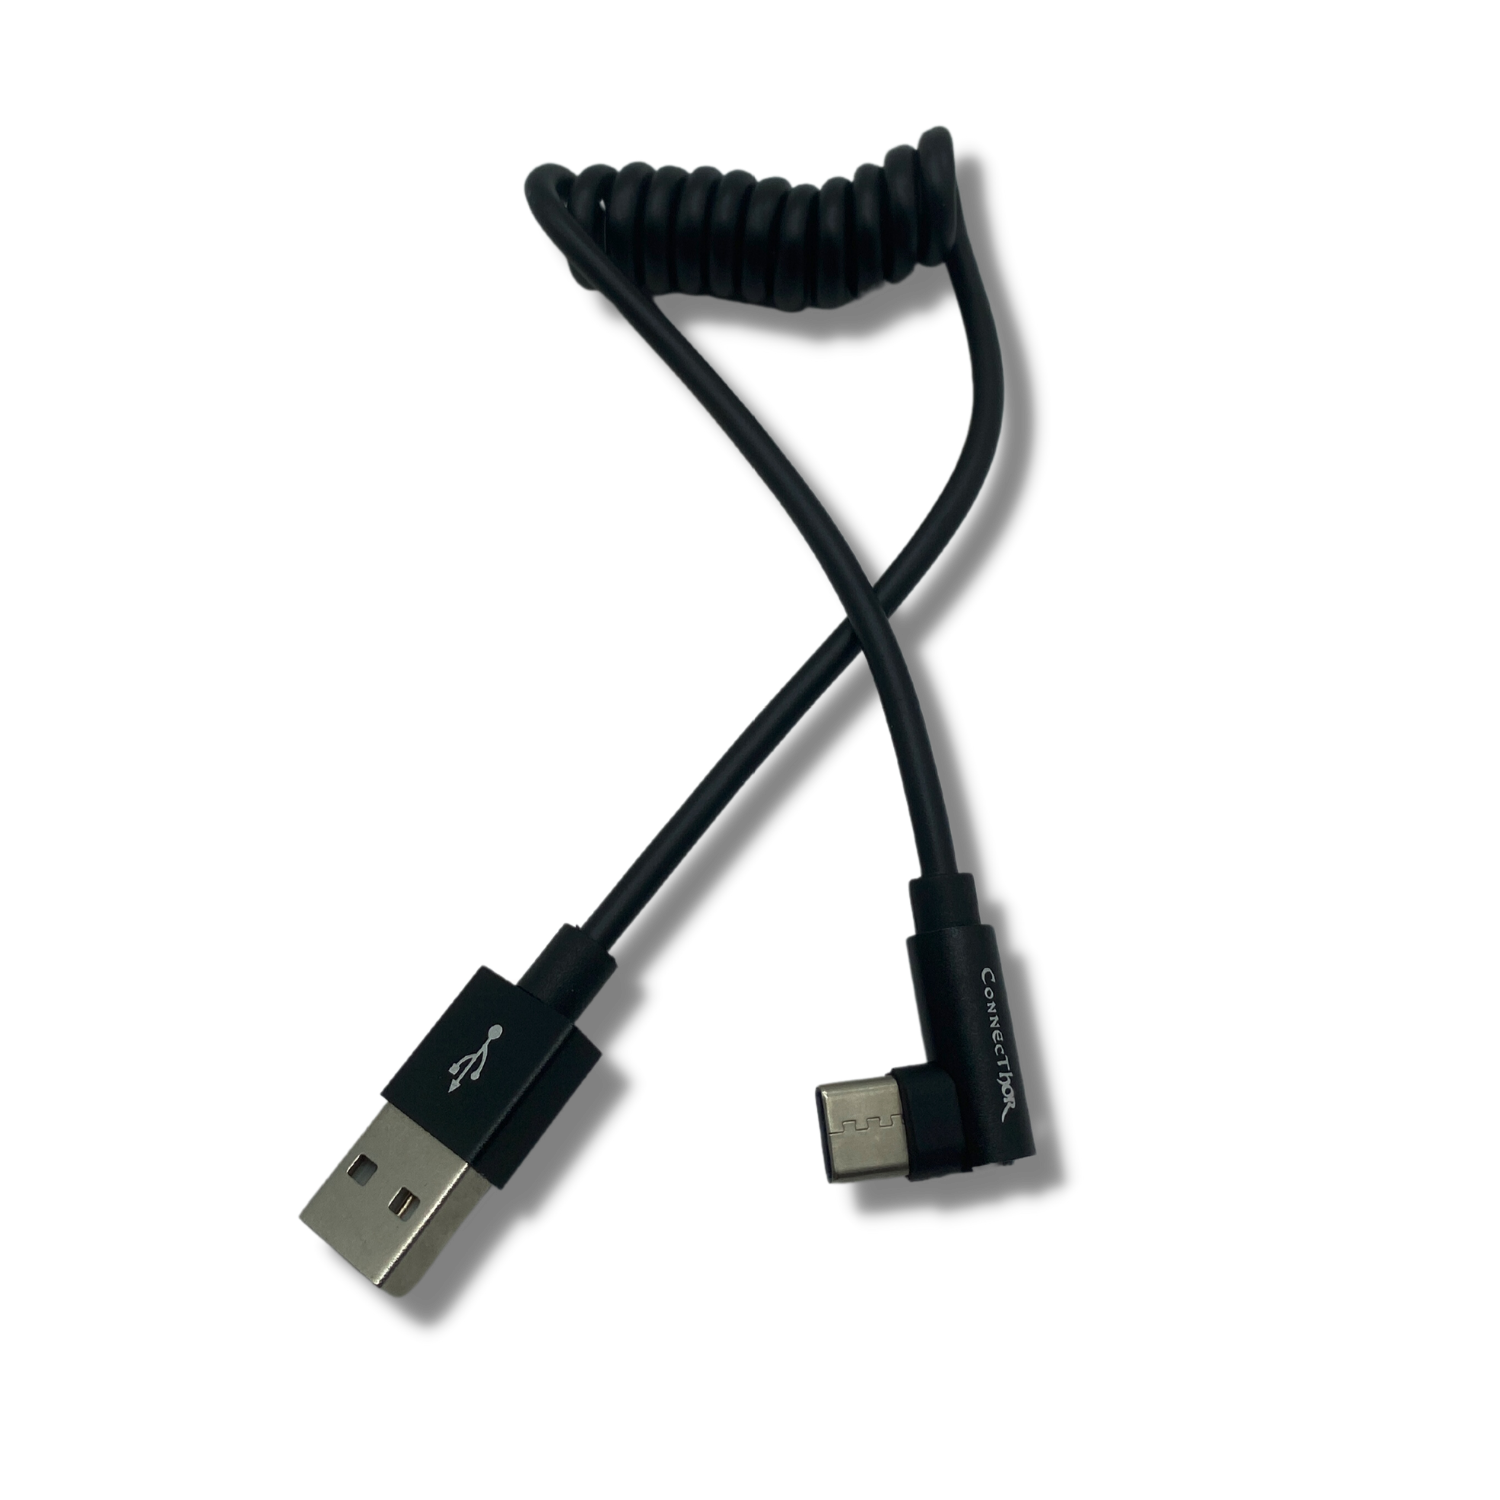 Oceaan jam Impressionisme ConnecThor USB 2.0 - Type C Coiled Cable